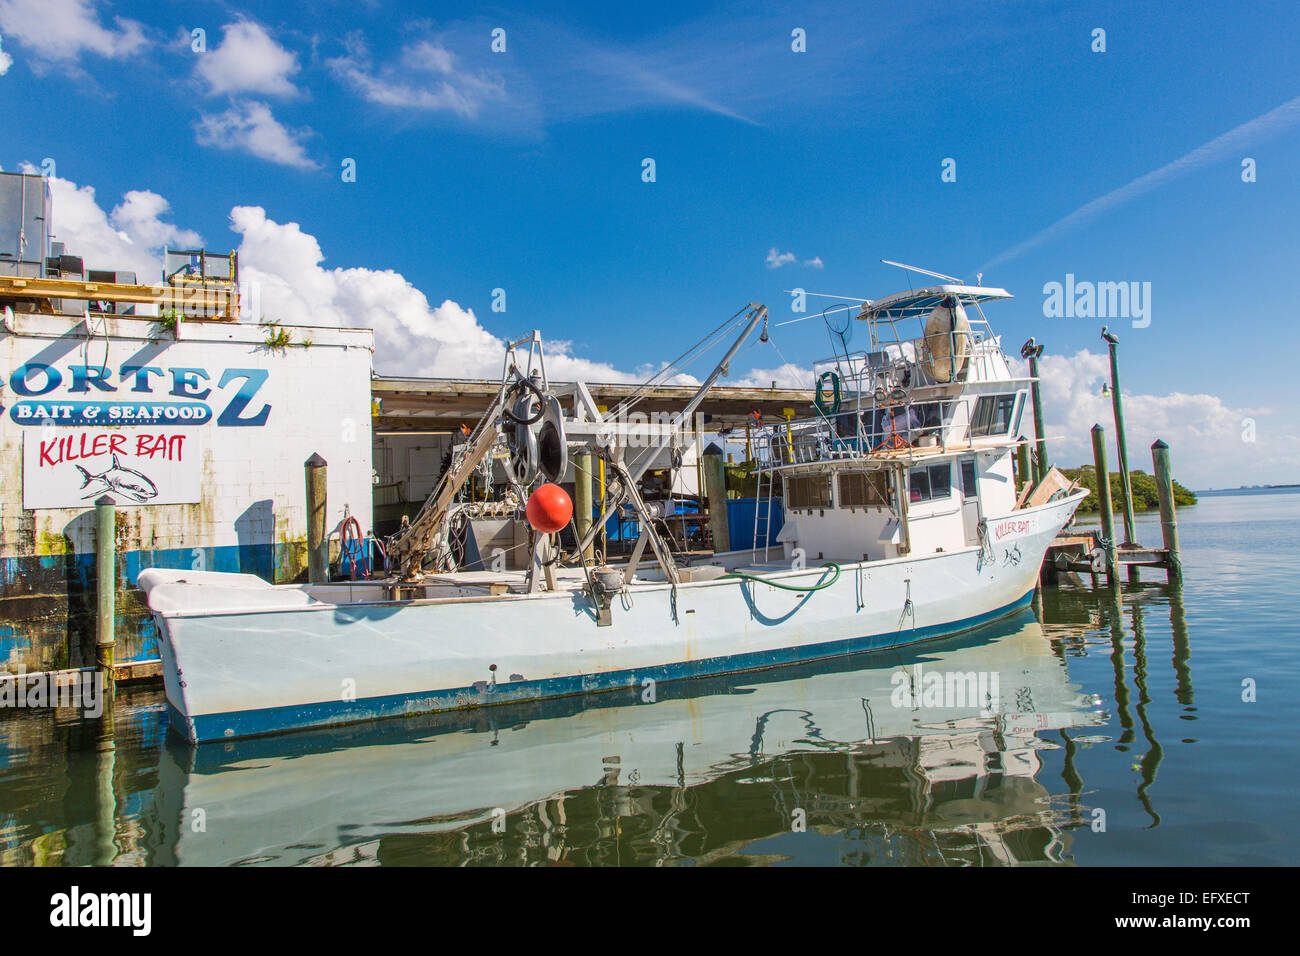 https://c8.alamy.com/comp/EFXECT/fishing-boats-in-old-historic-commercial-fishing-village-of-cortez-EFXECT.jpg